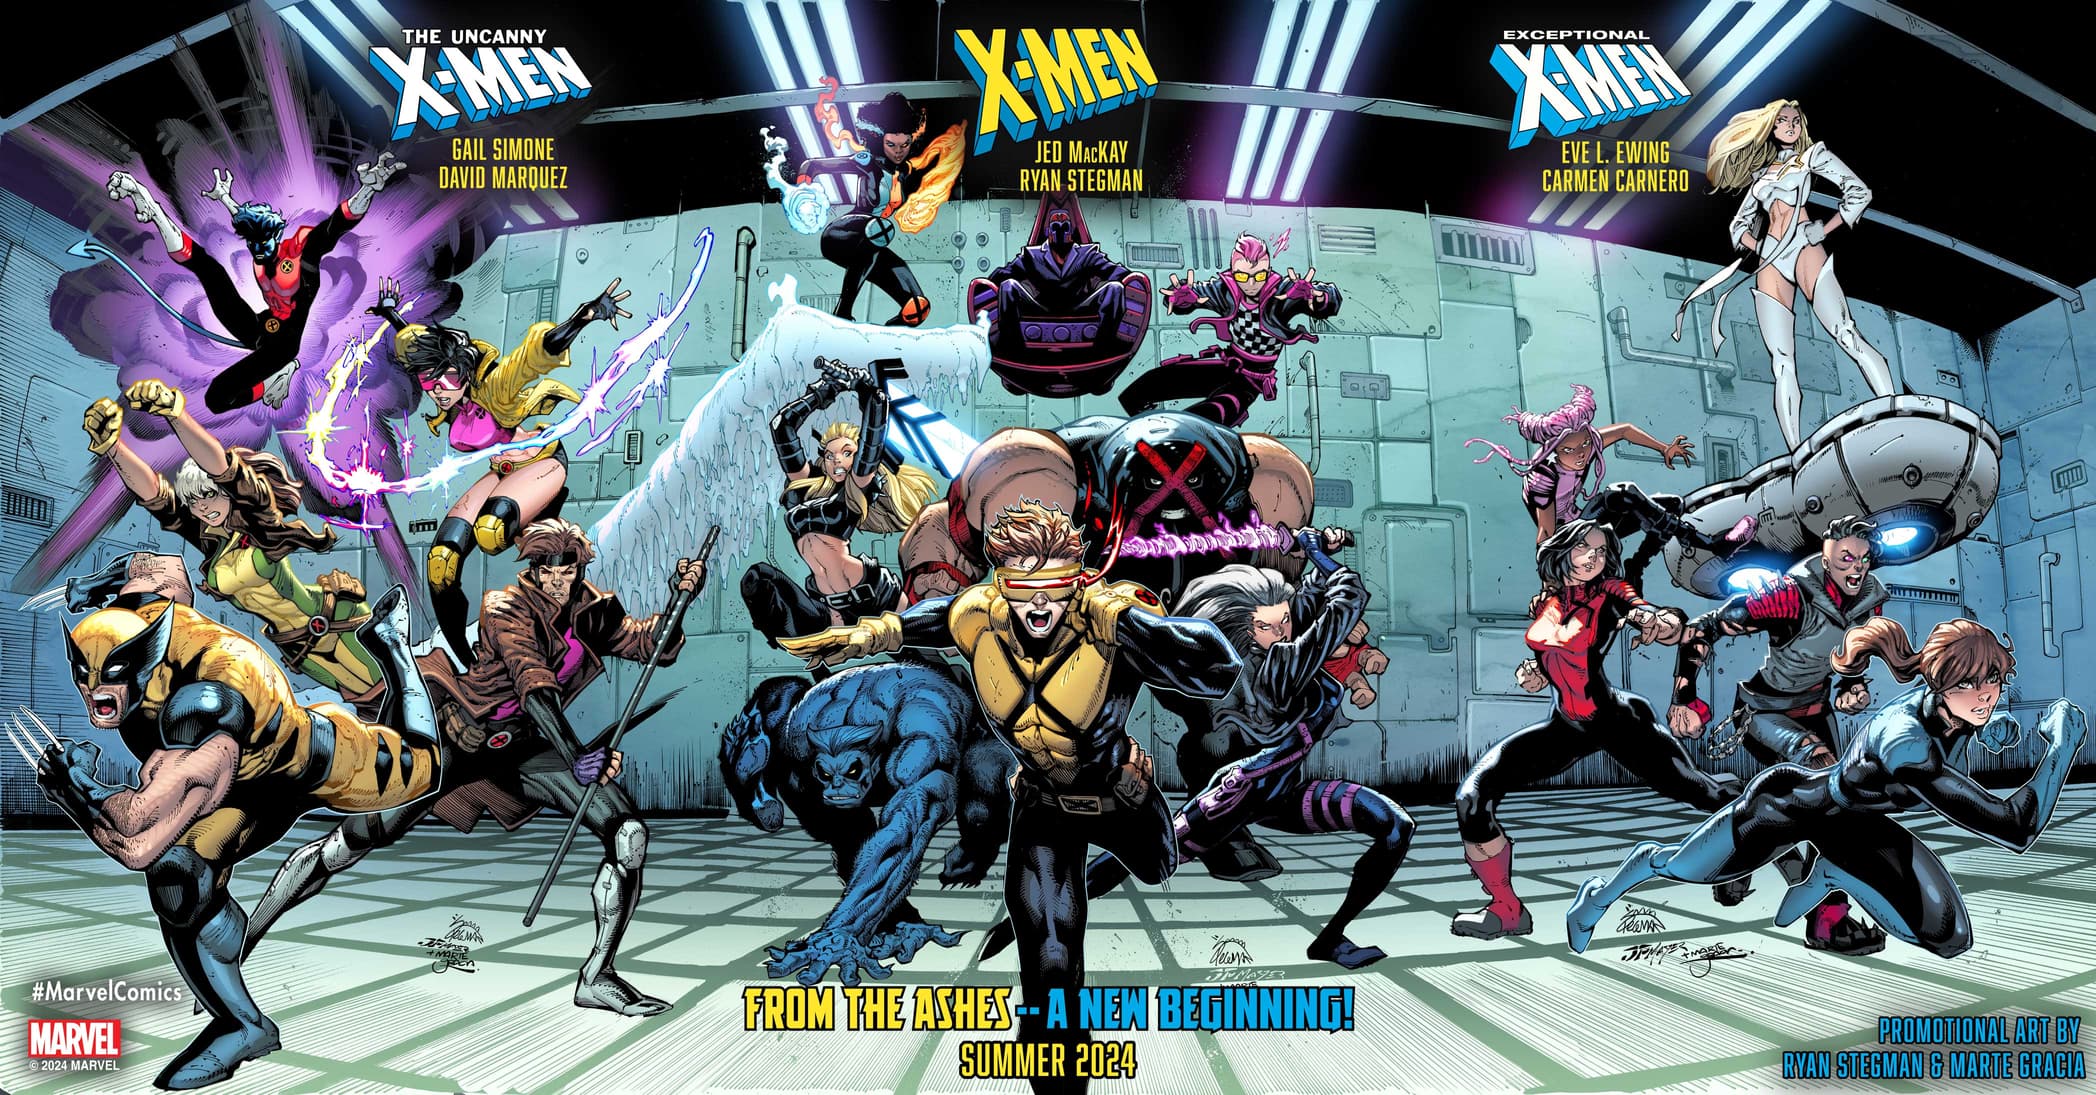 X-Men: From the Ashes main titles